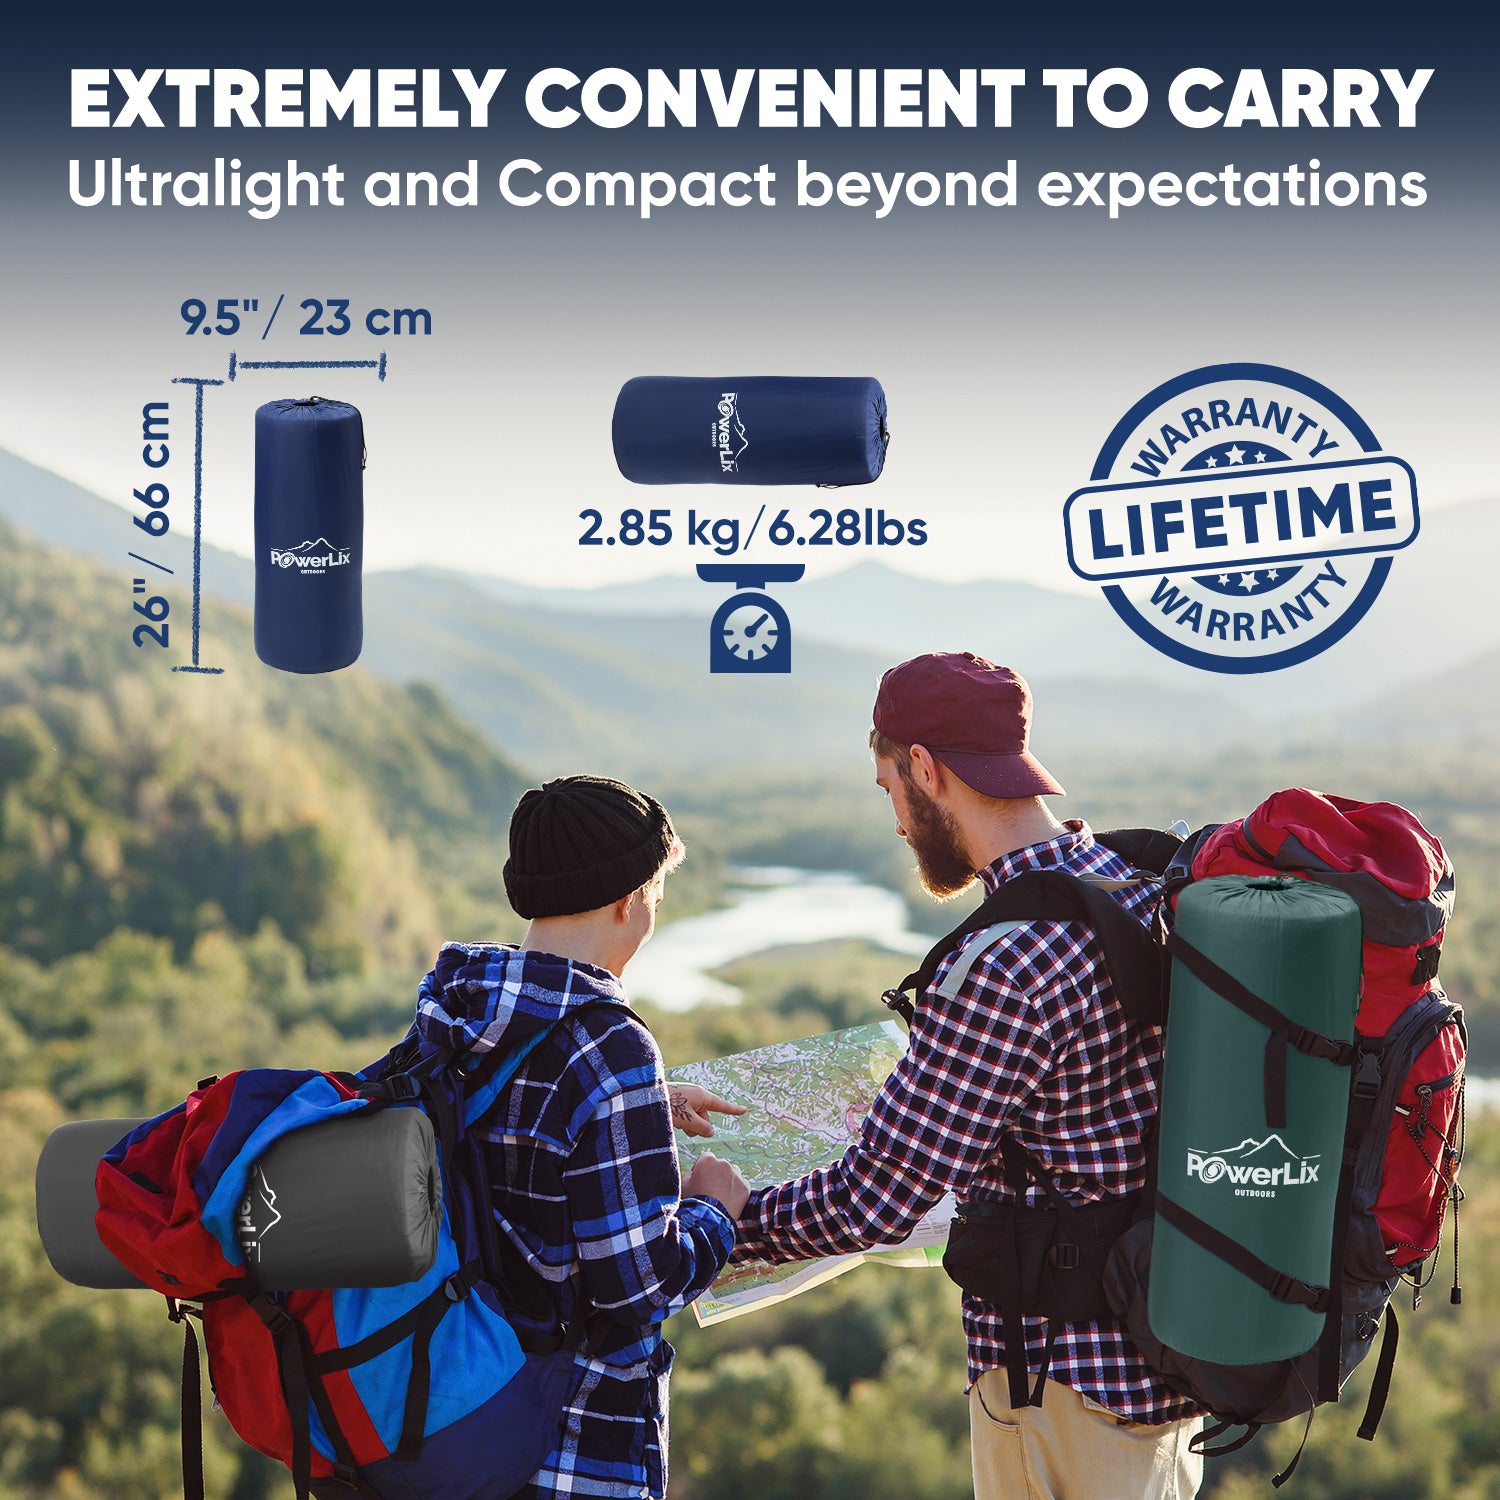 Two models hiking, each with a Powerlix sleeping pad strapped to their packs. The stored sleeping pad is displayed twice. The dimesions are listed as, "26"/66cm by 9.5"/23cm." The weight is listed as, "2.85kg/6.28lbs." The text beside is, "Lifetime warranty." Uper text reads, "Extremely convenient to carry. Ultralight and compact beyond expectations."